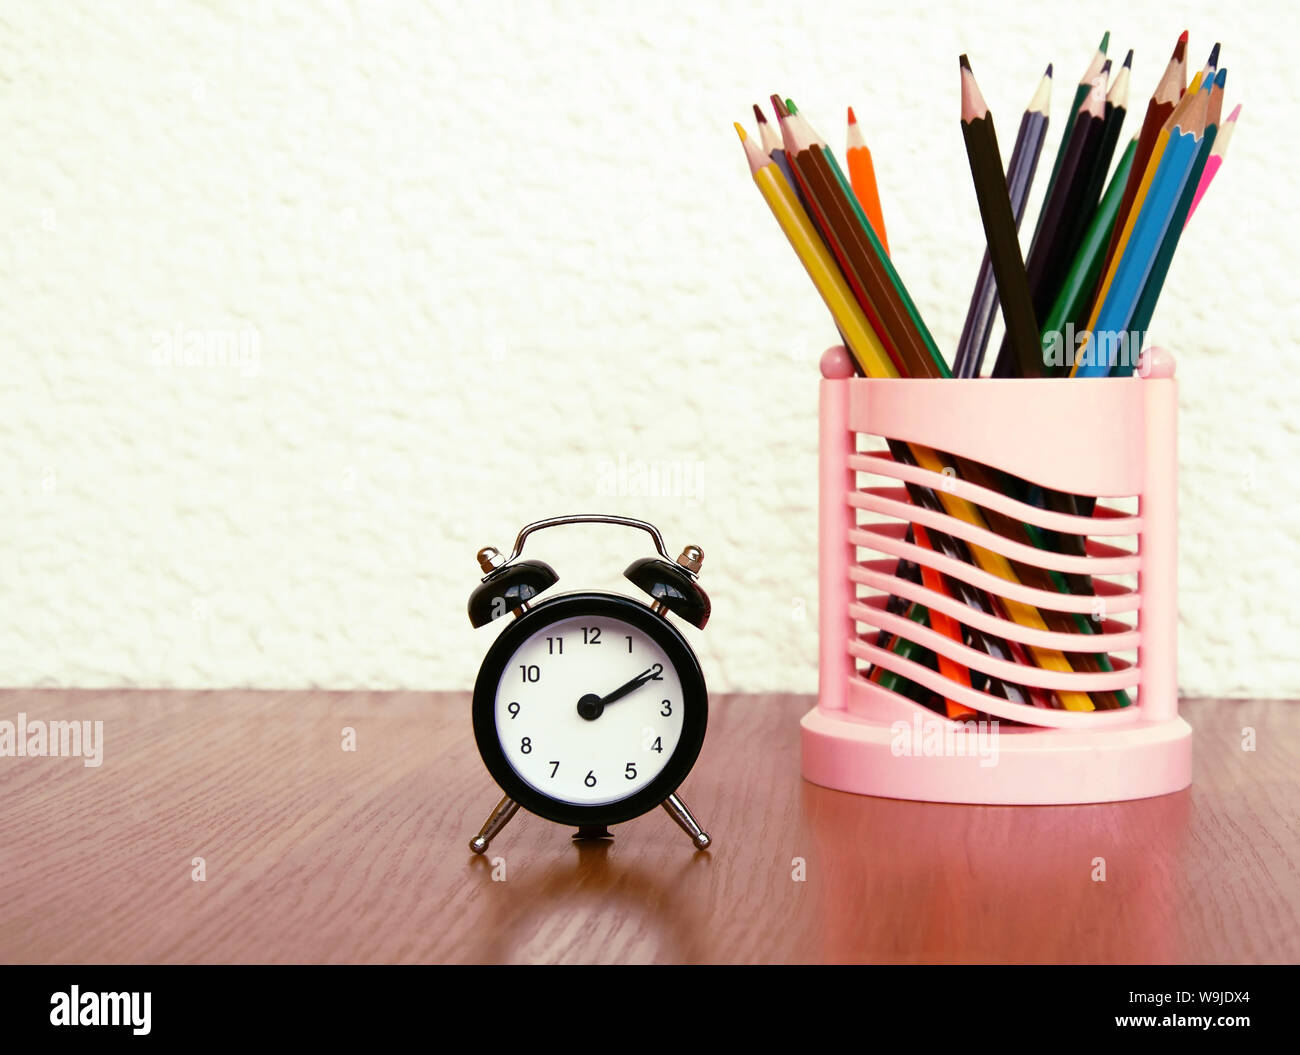 black alarm clock with arrows and color pencils on a wooden table, close-up Stock Photo